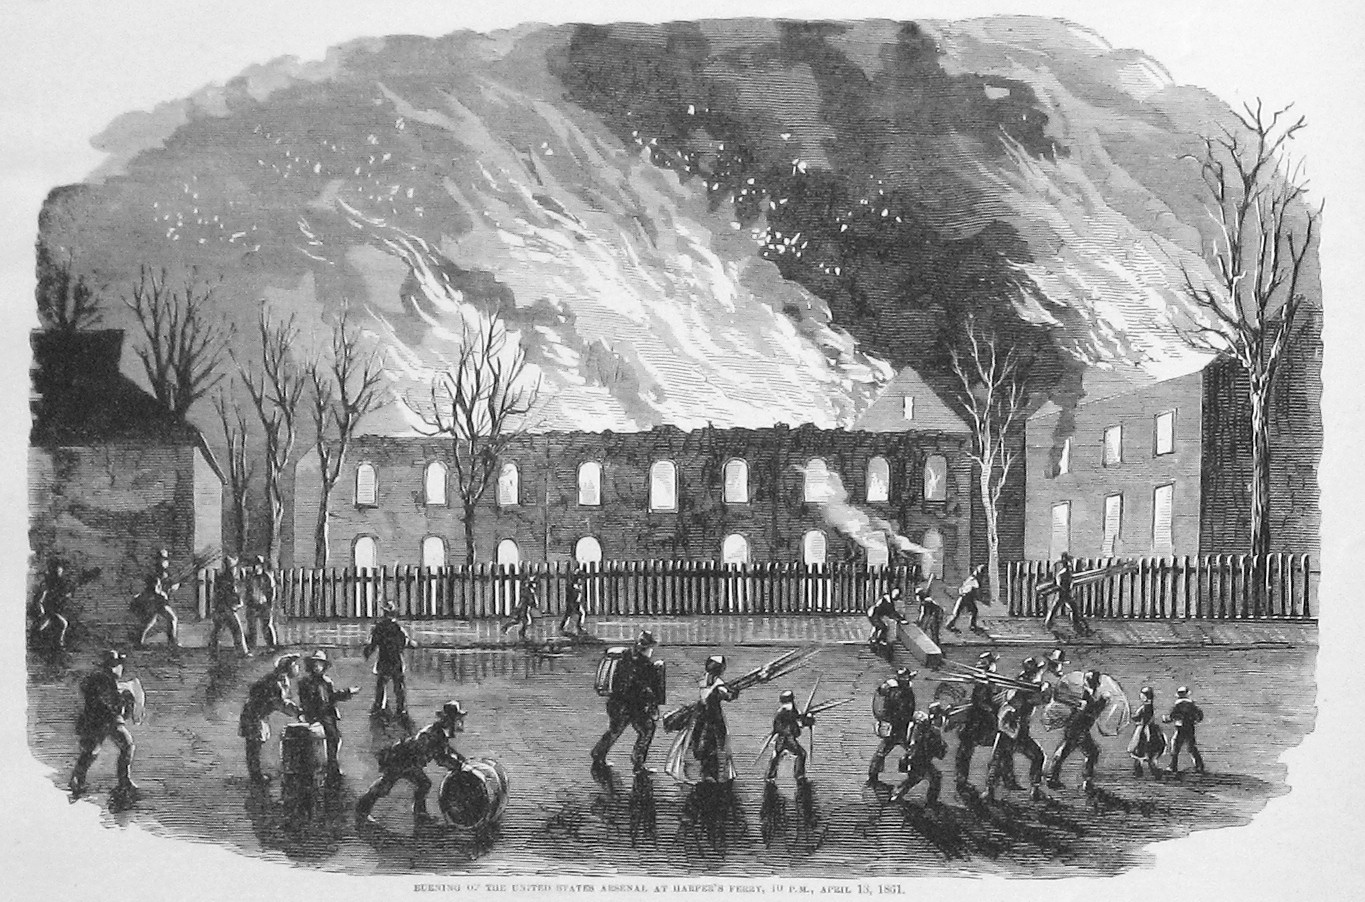 harpers ferry burning april 13 1861